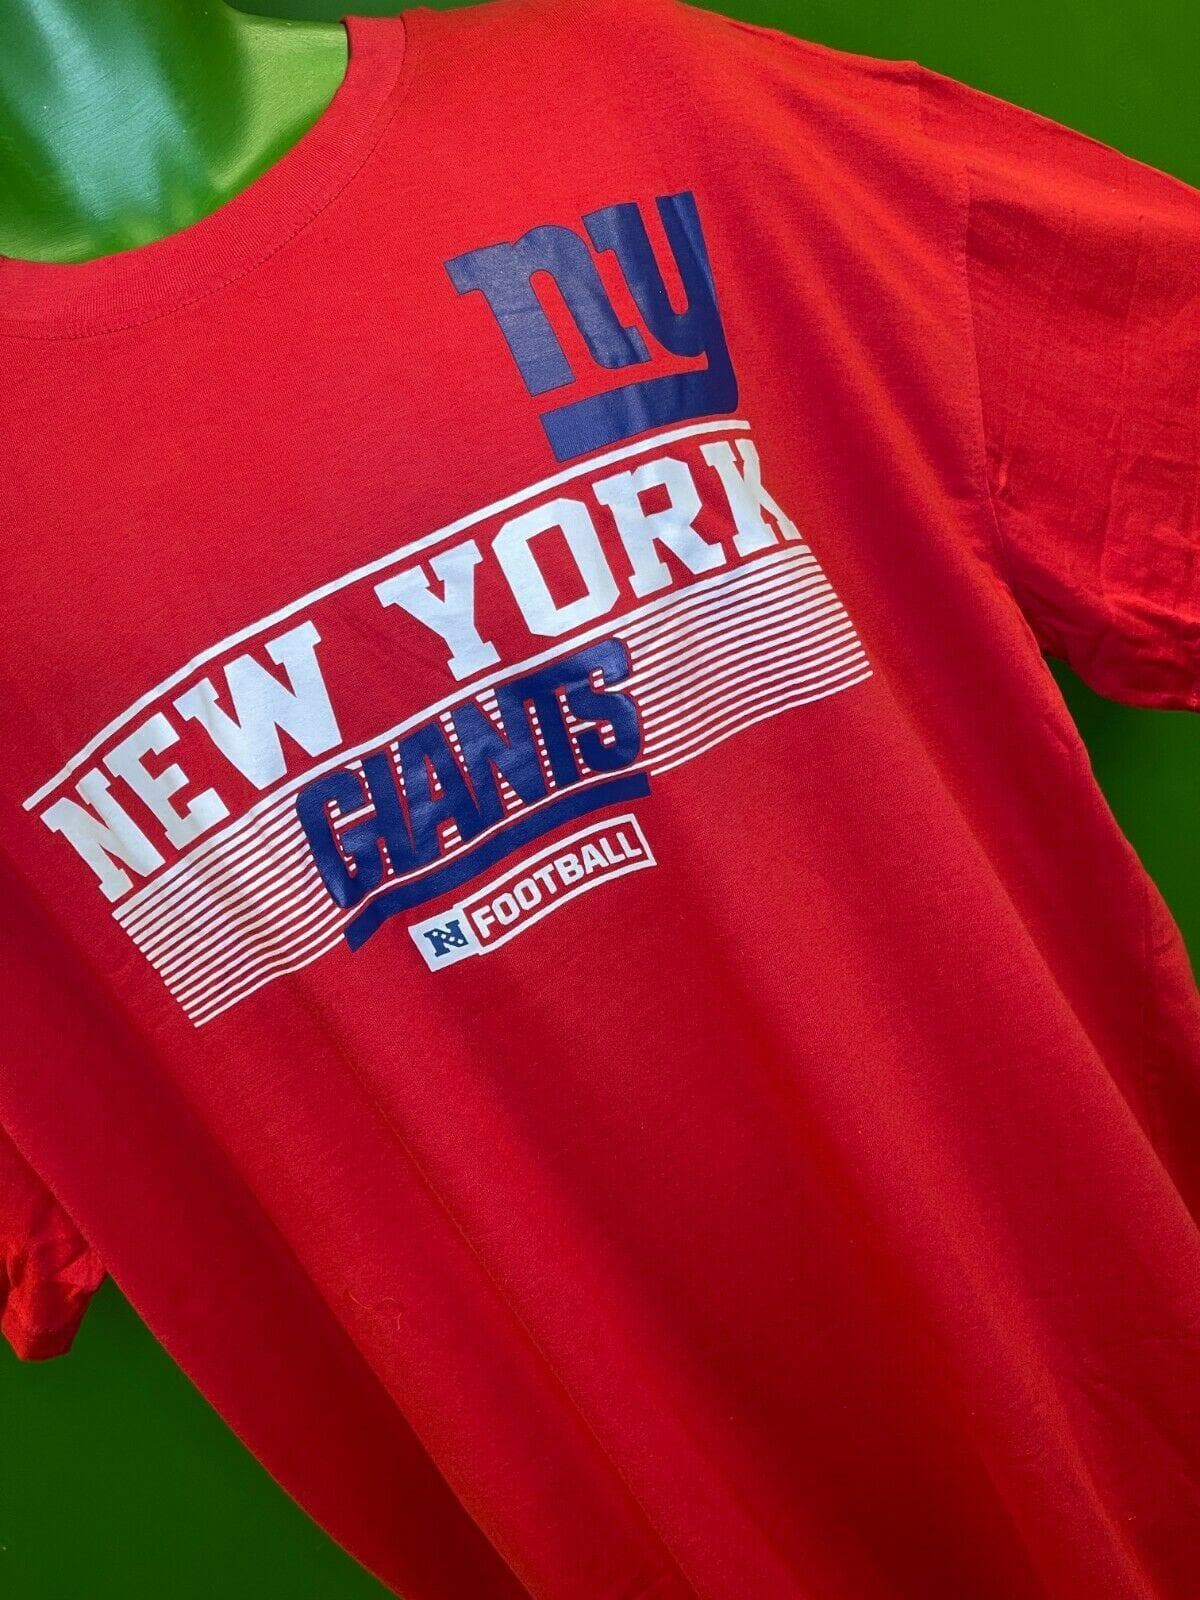 NFL New York Giants Majestic Red Cotton T-Shirt Men's 3X-Large NWT